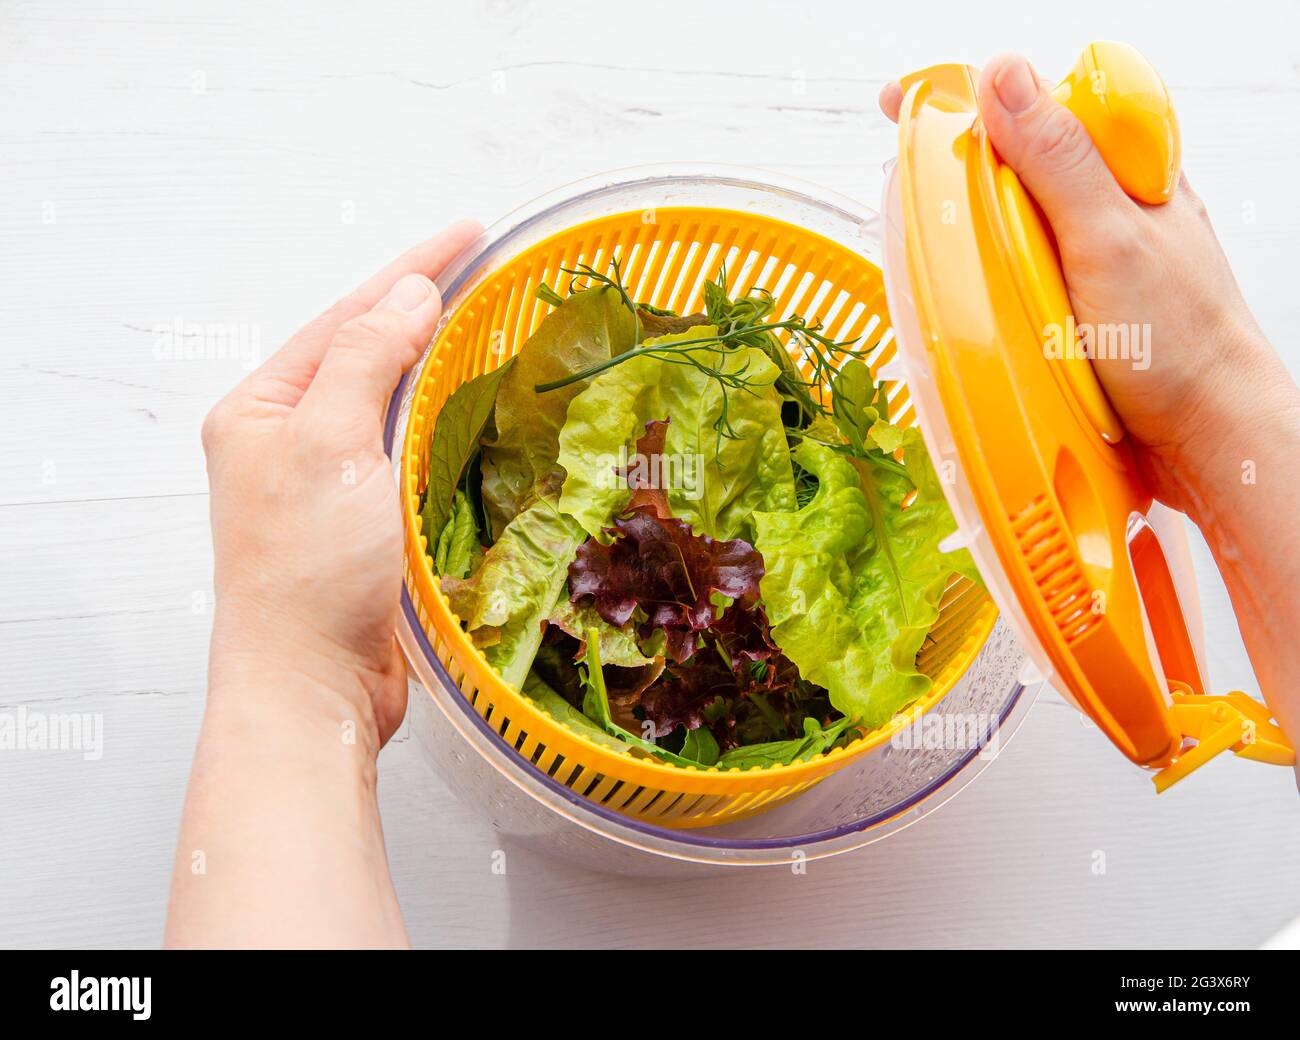 Top view of woman hands holding and drying salad in spinner tool bowl, healthy leafy greens inside. Comfortable way for washing and drying salad. Stock Photo